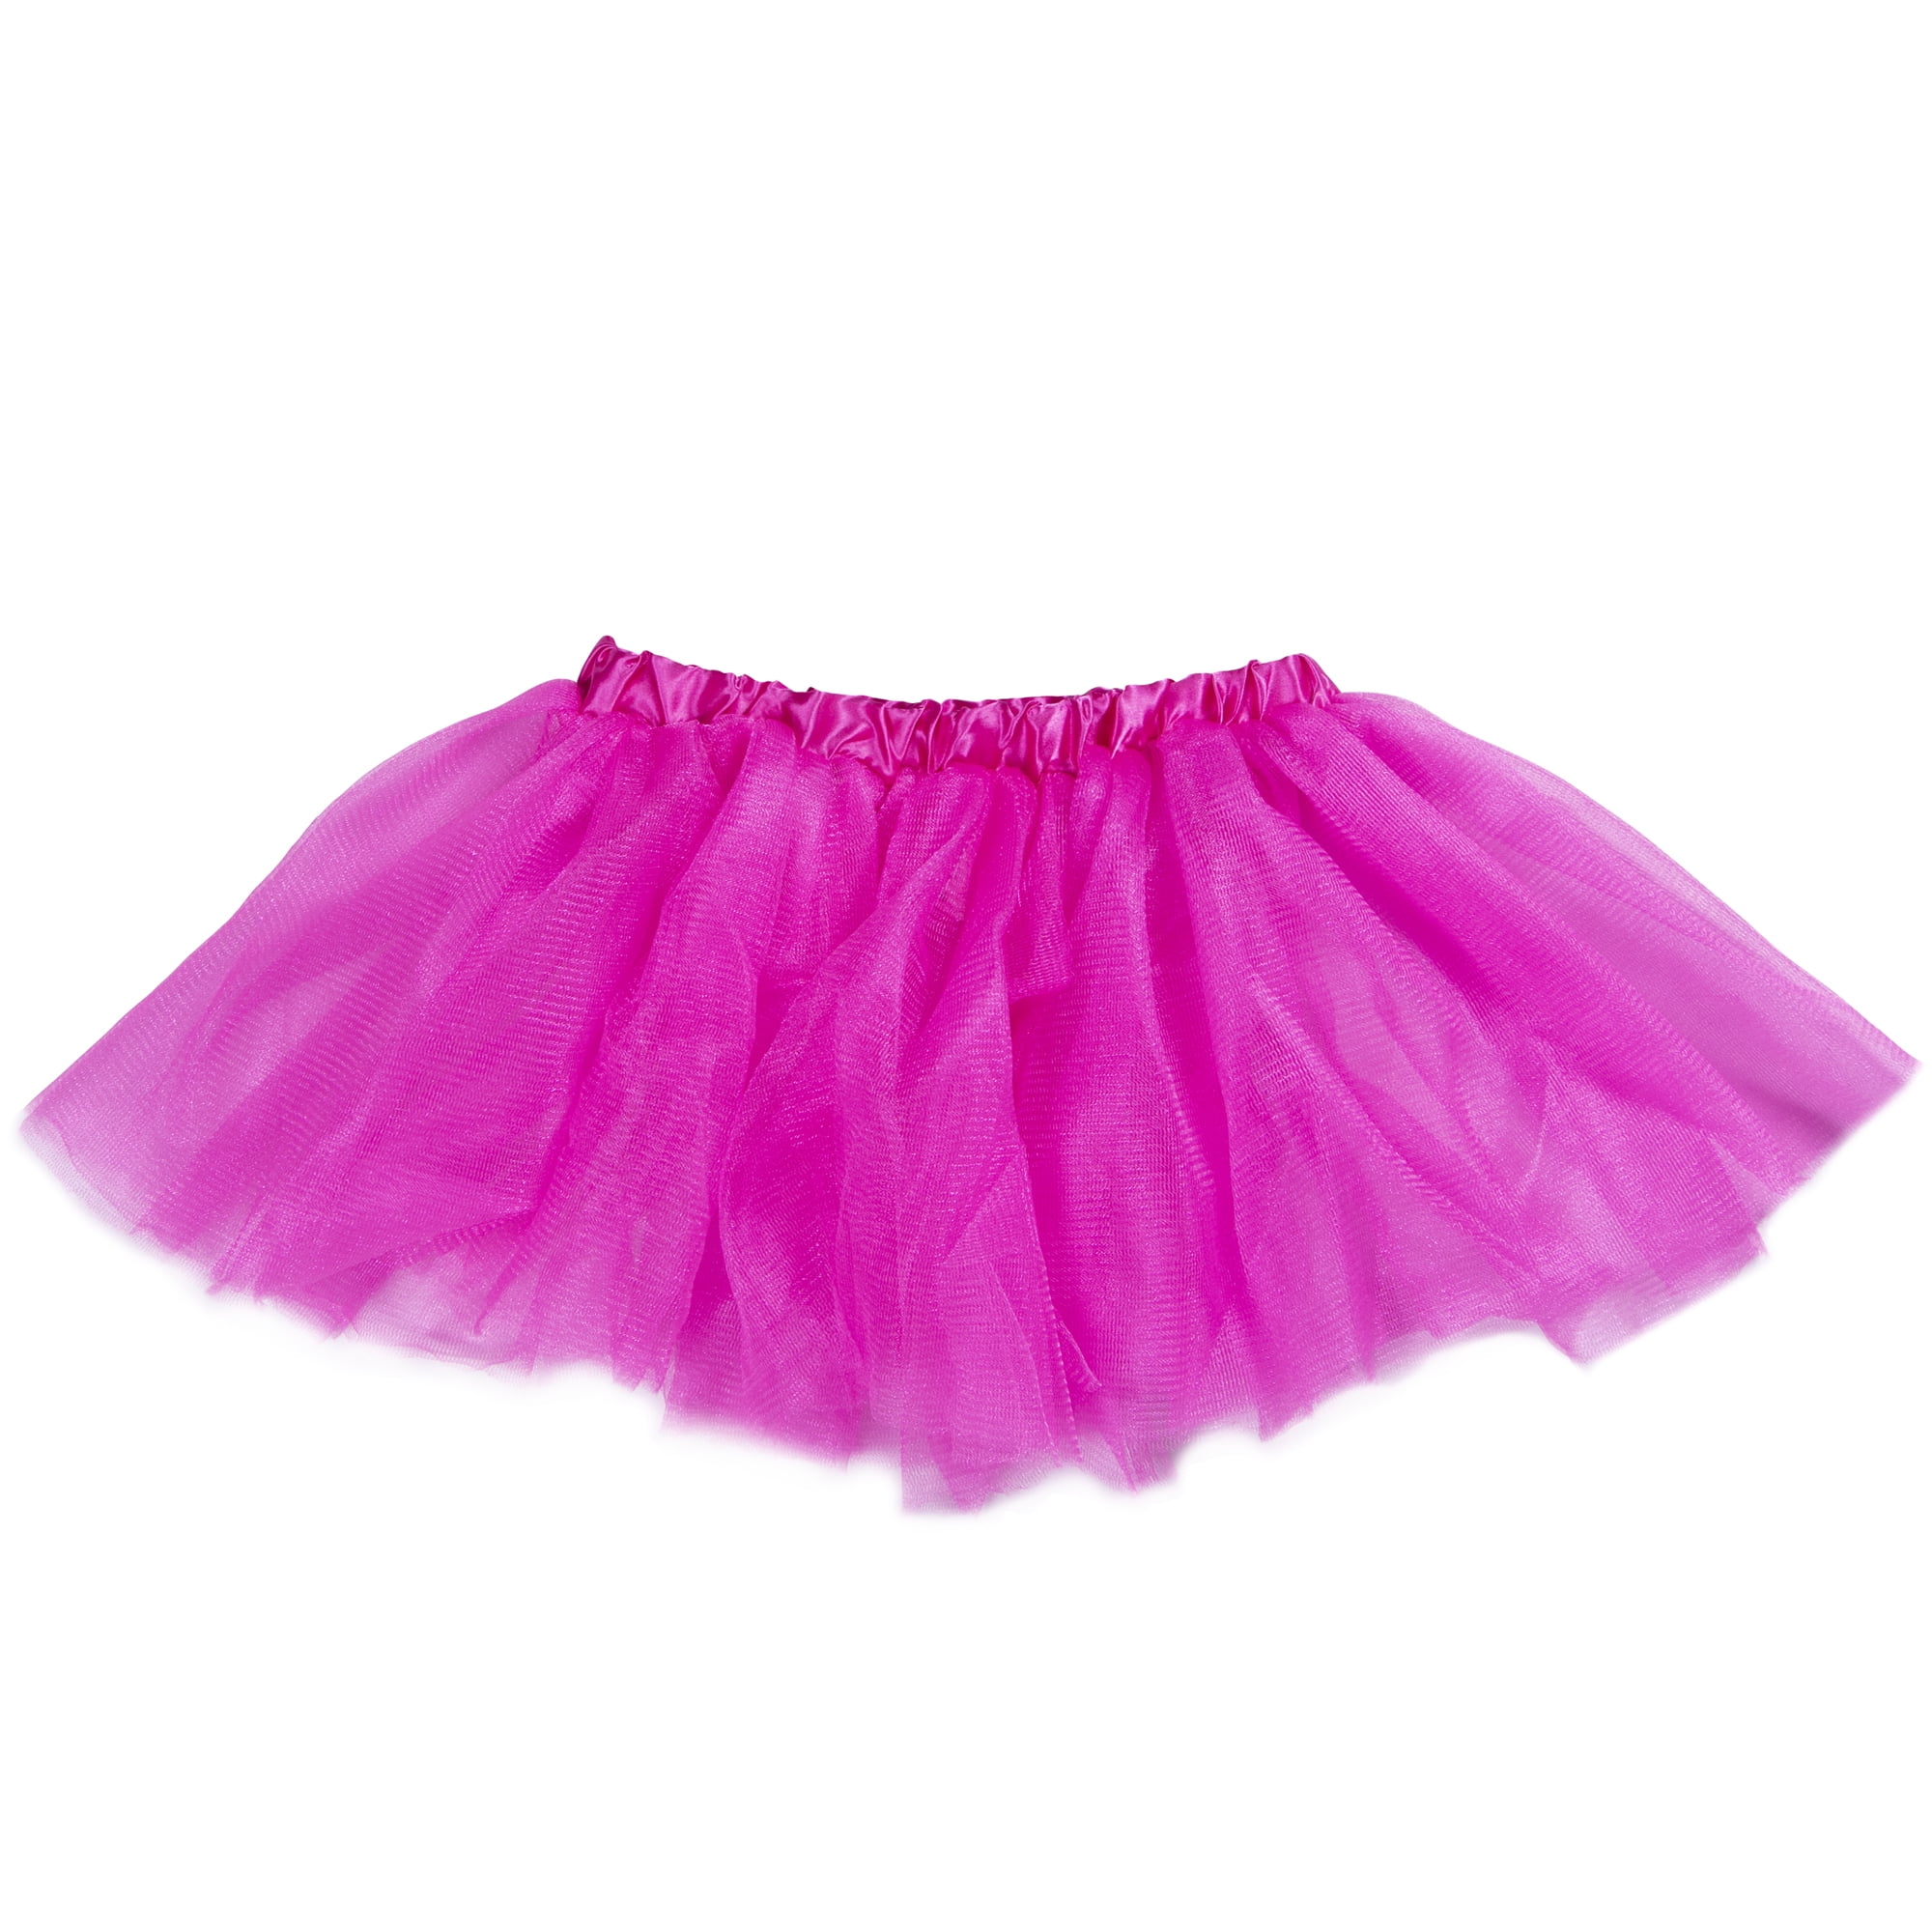 Picture of Brybelly MCOS-502 Hot Pink Costume Tutu